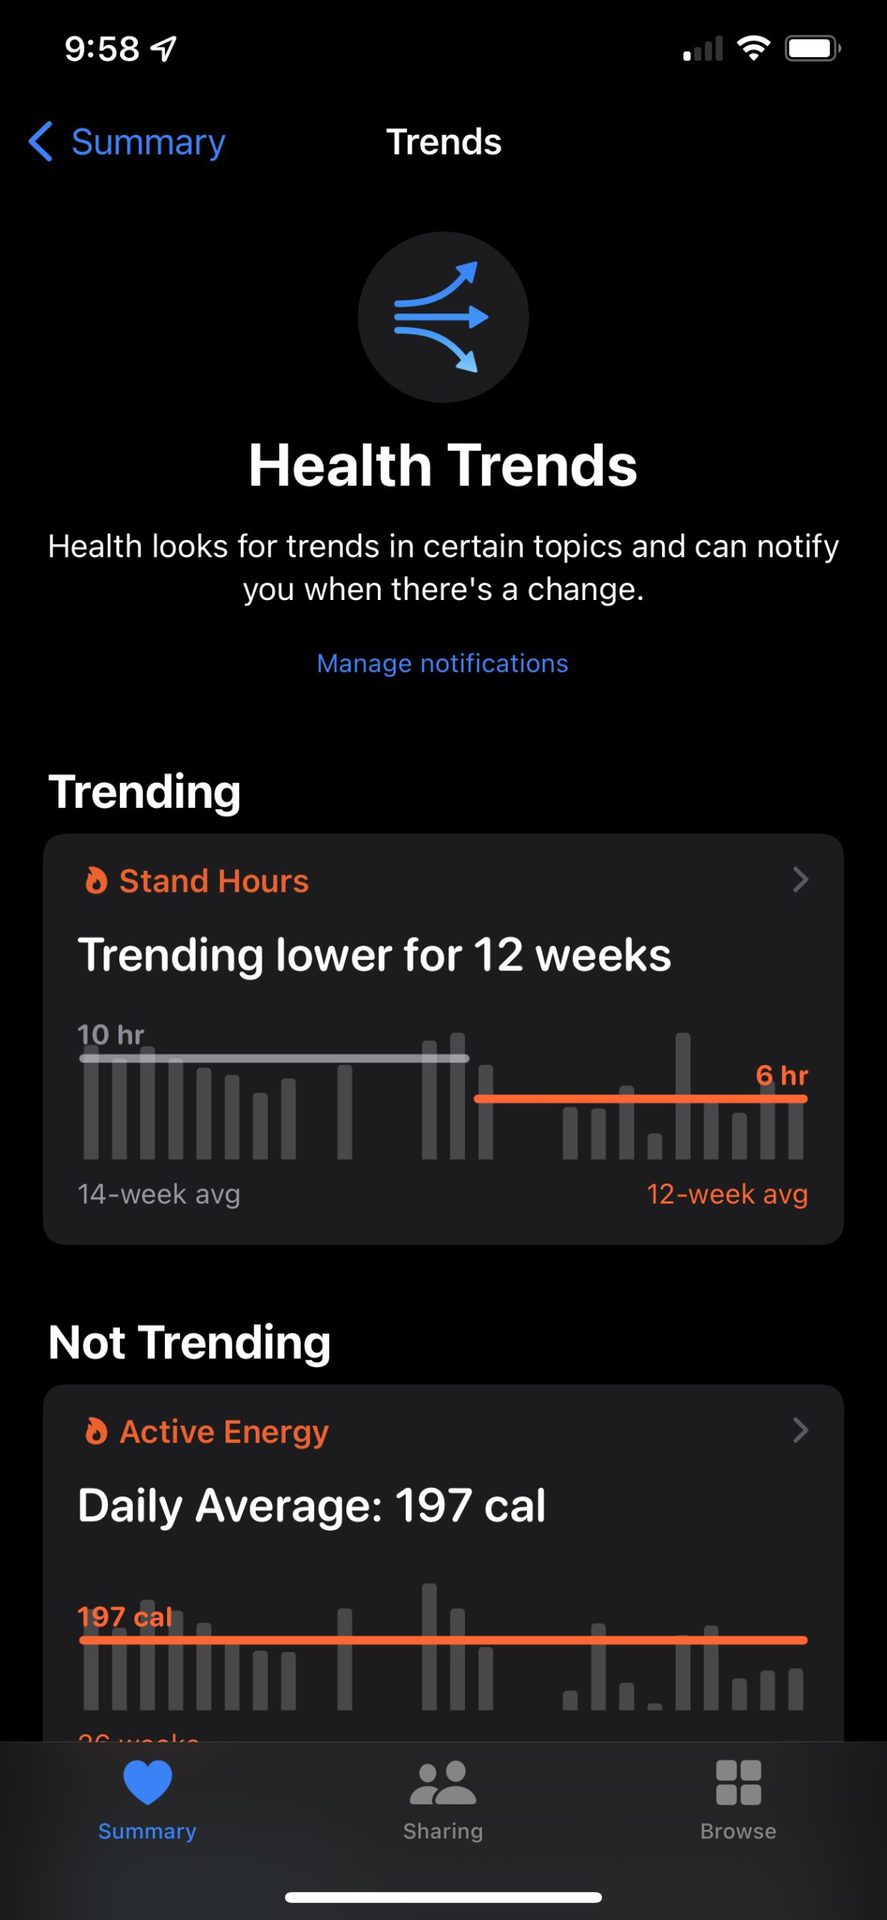 A screen shot of the Health Trends landing page on Apple's Health app.